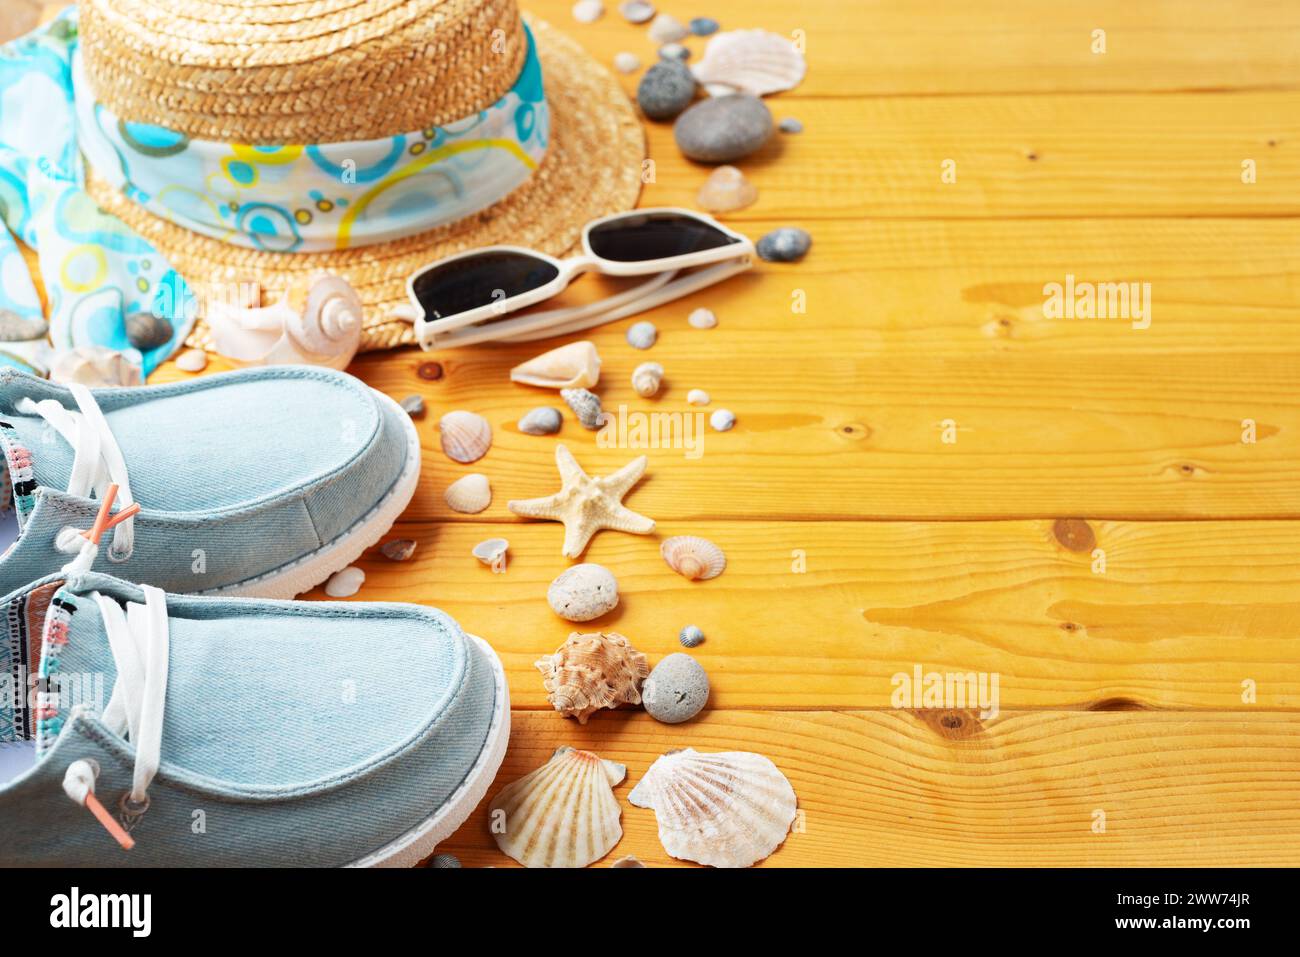 Holiday vacation travel planning background of straw hat, sunglasses, moccasins and shells on natural wood planks Stock Photo